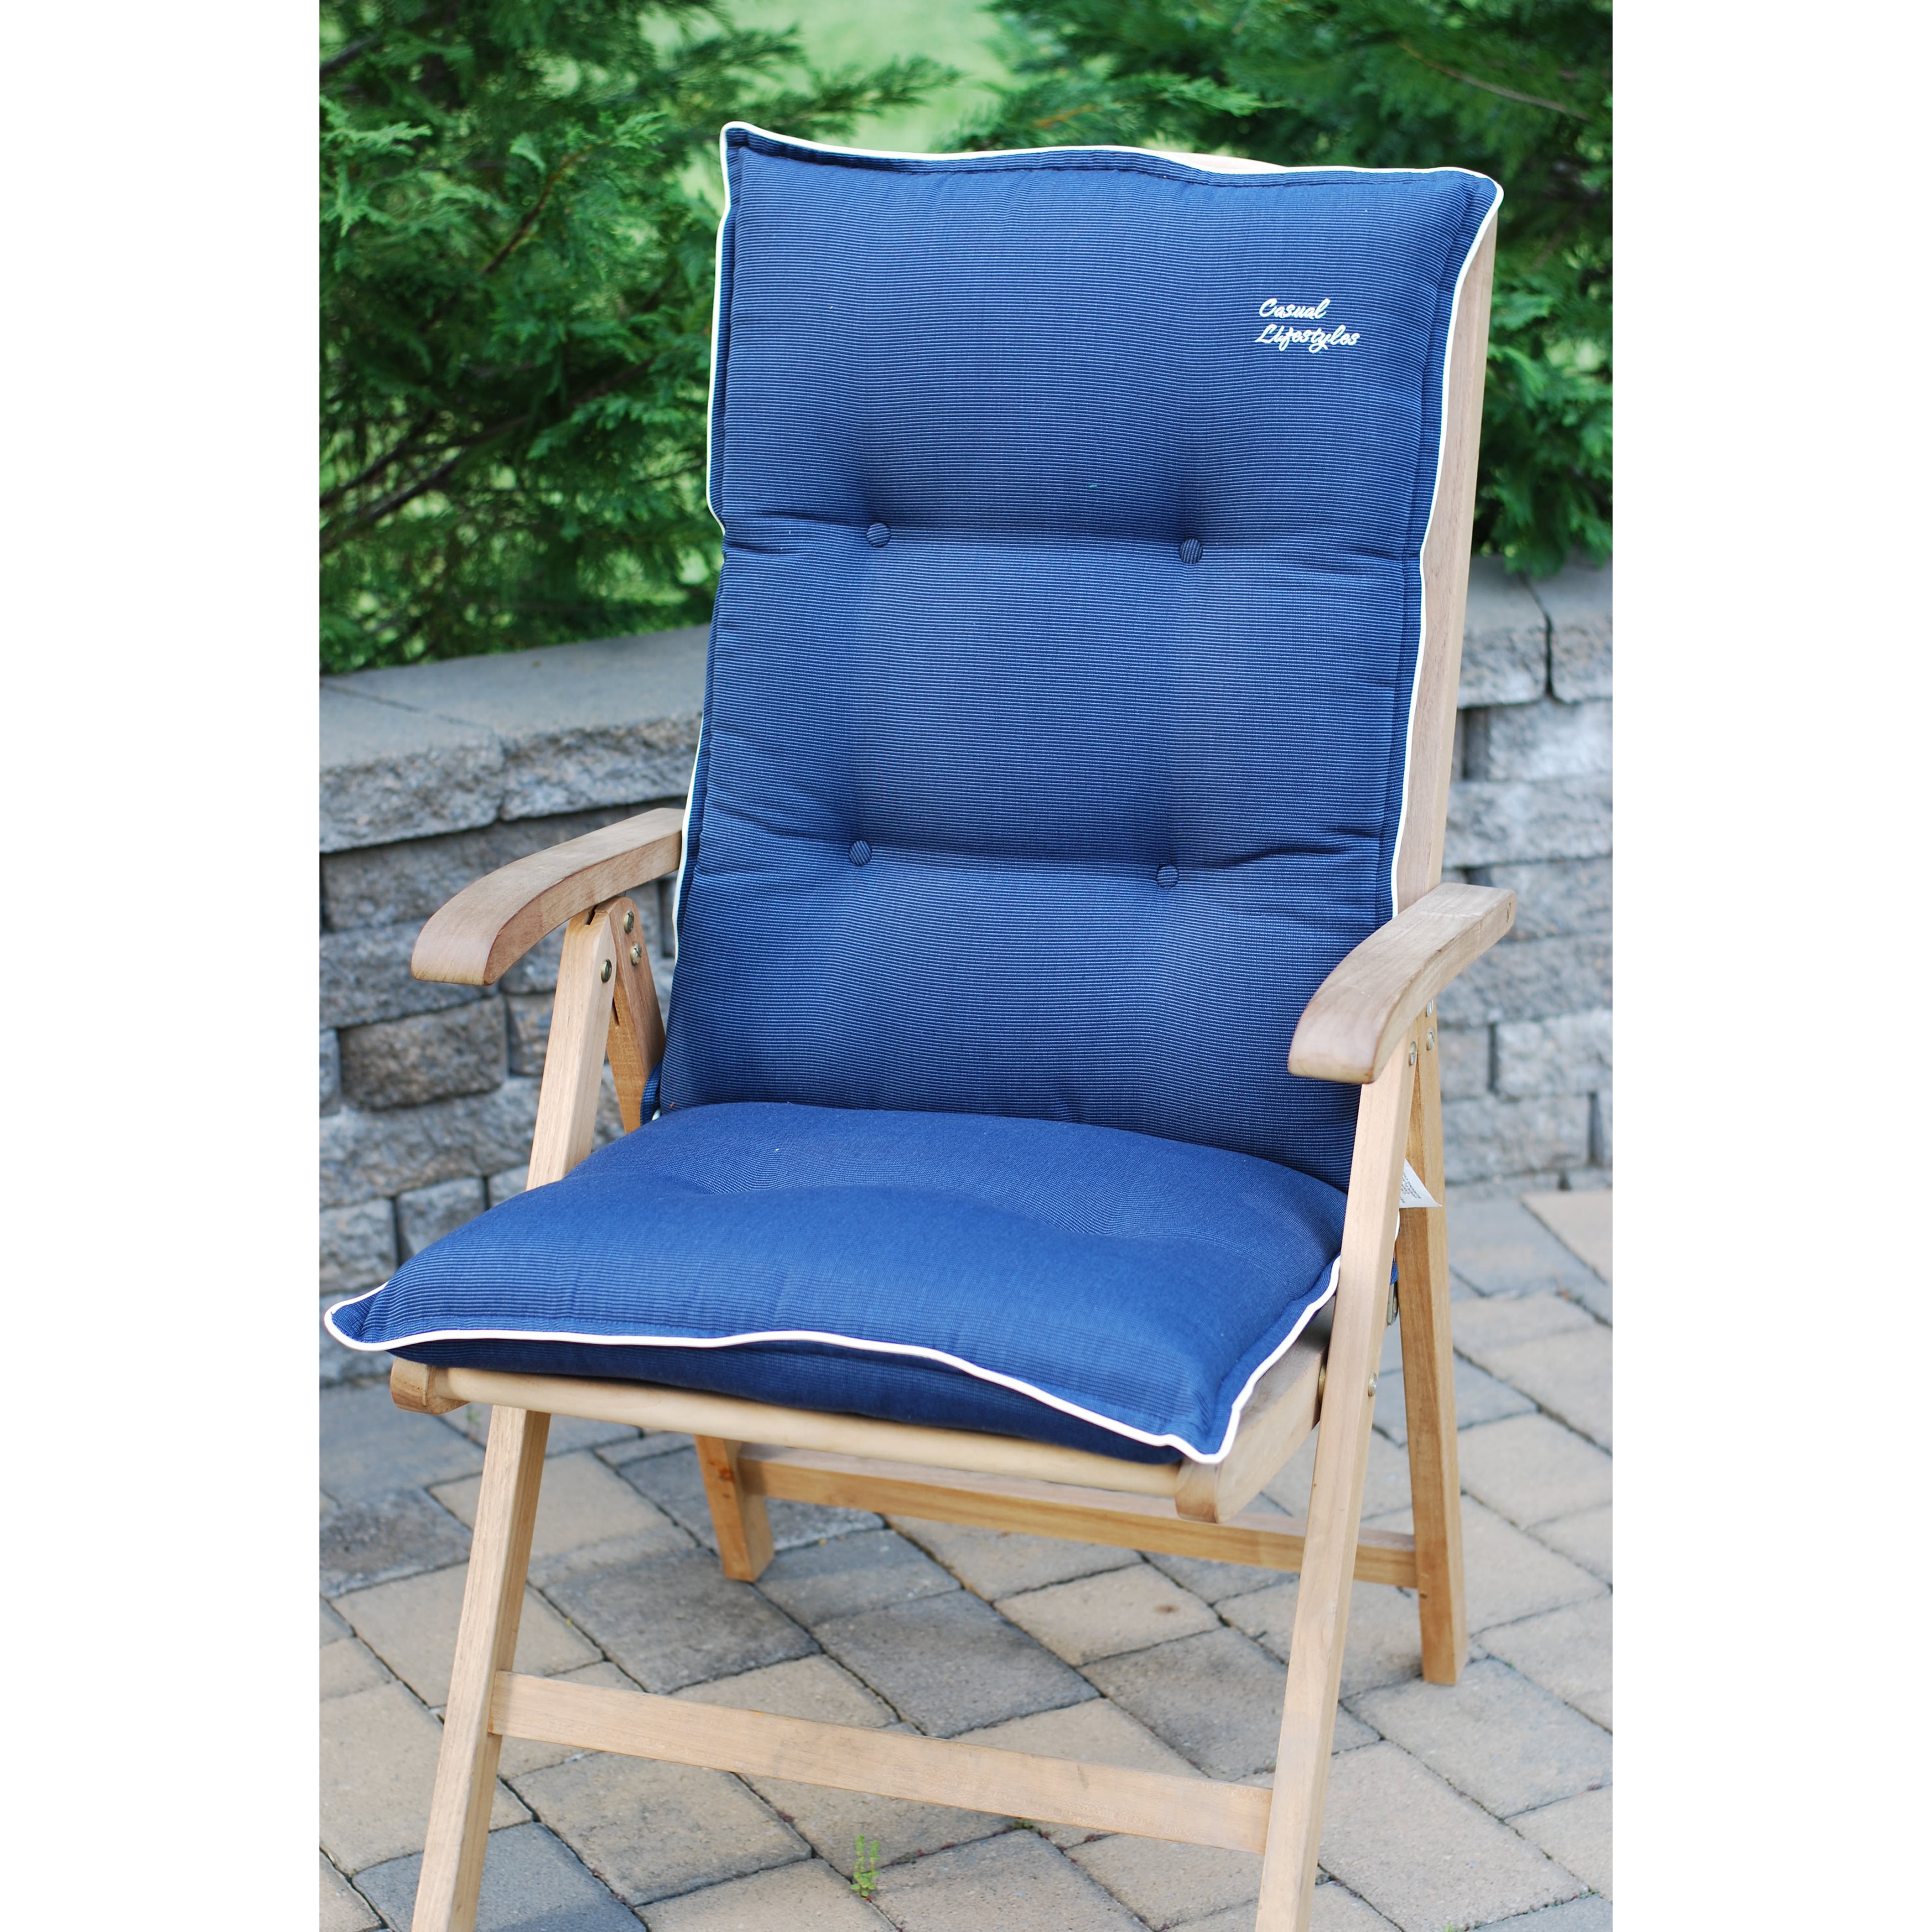 High Back/ Recliner Patio Chair Cushions (Set of 2) - Overstock